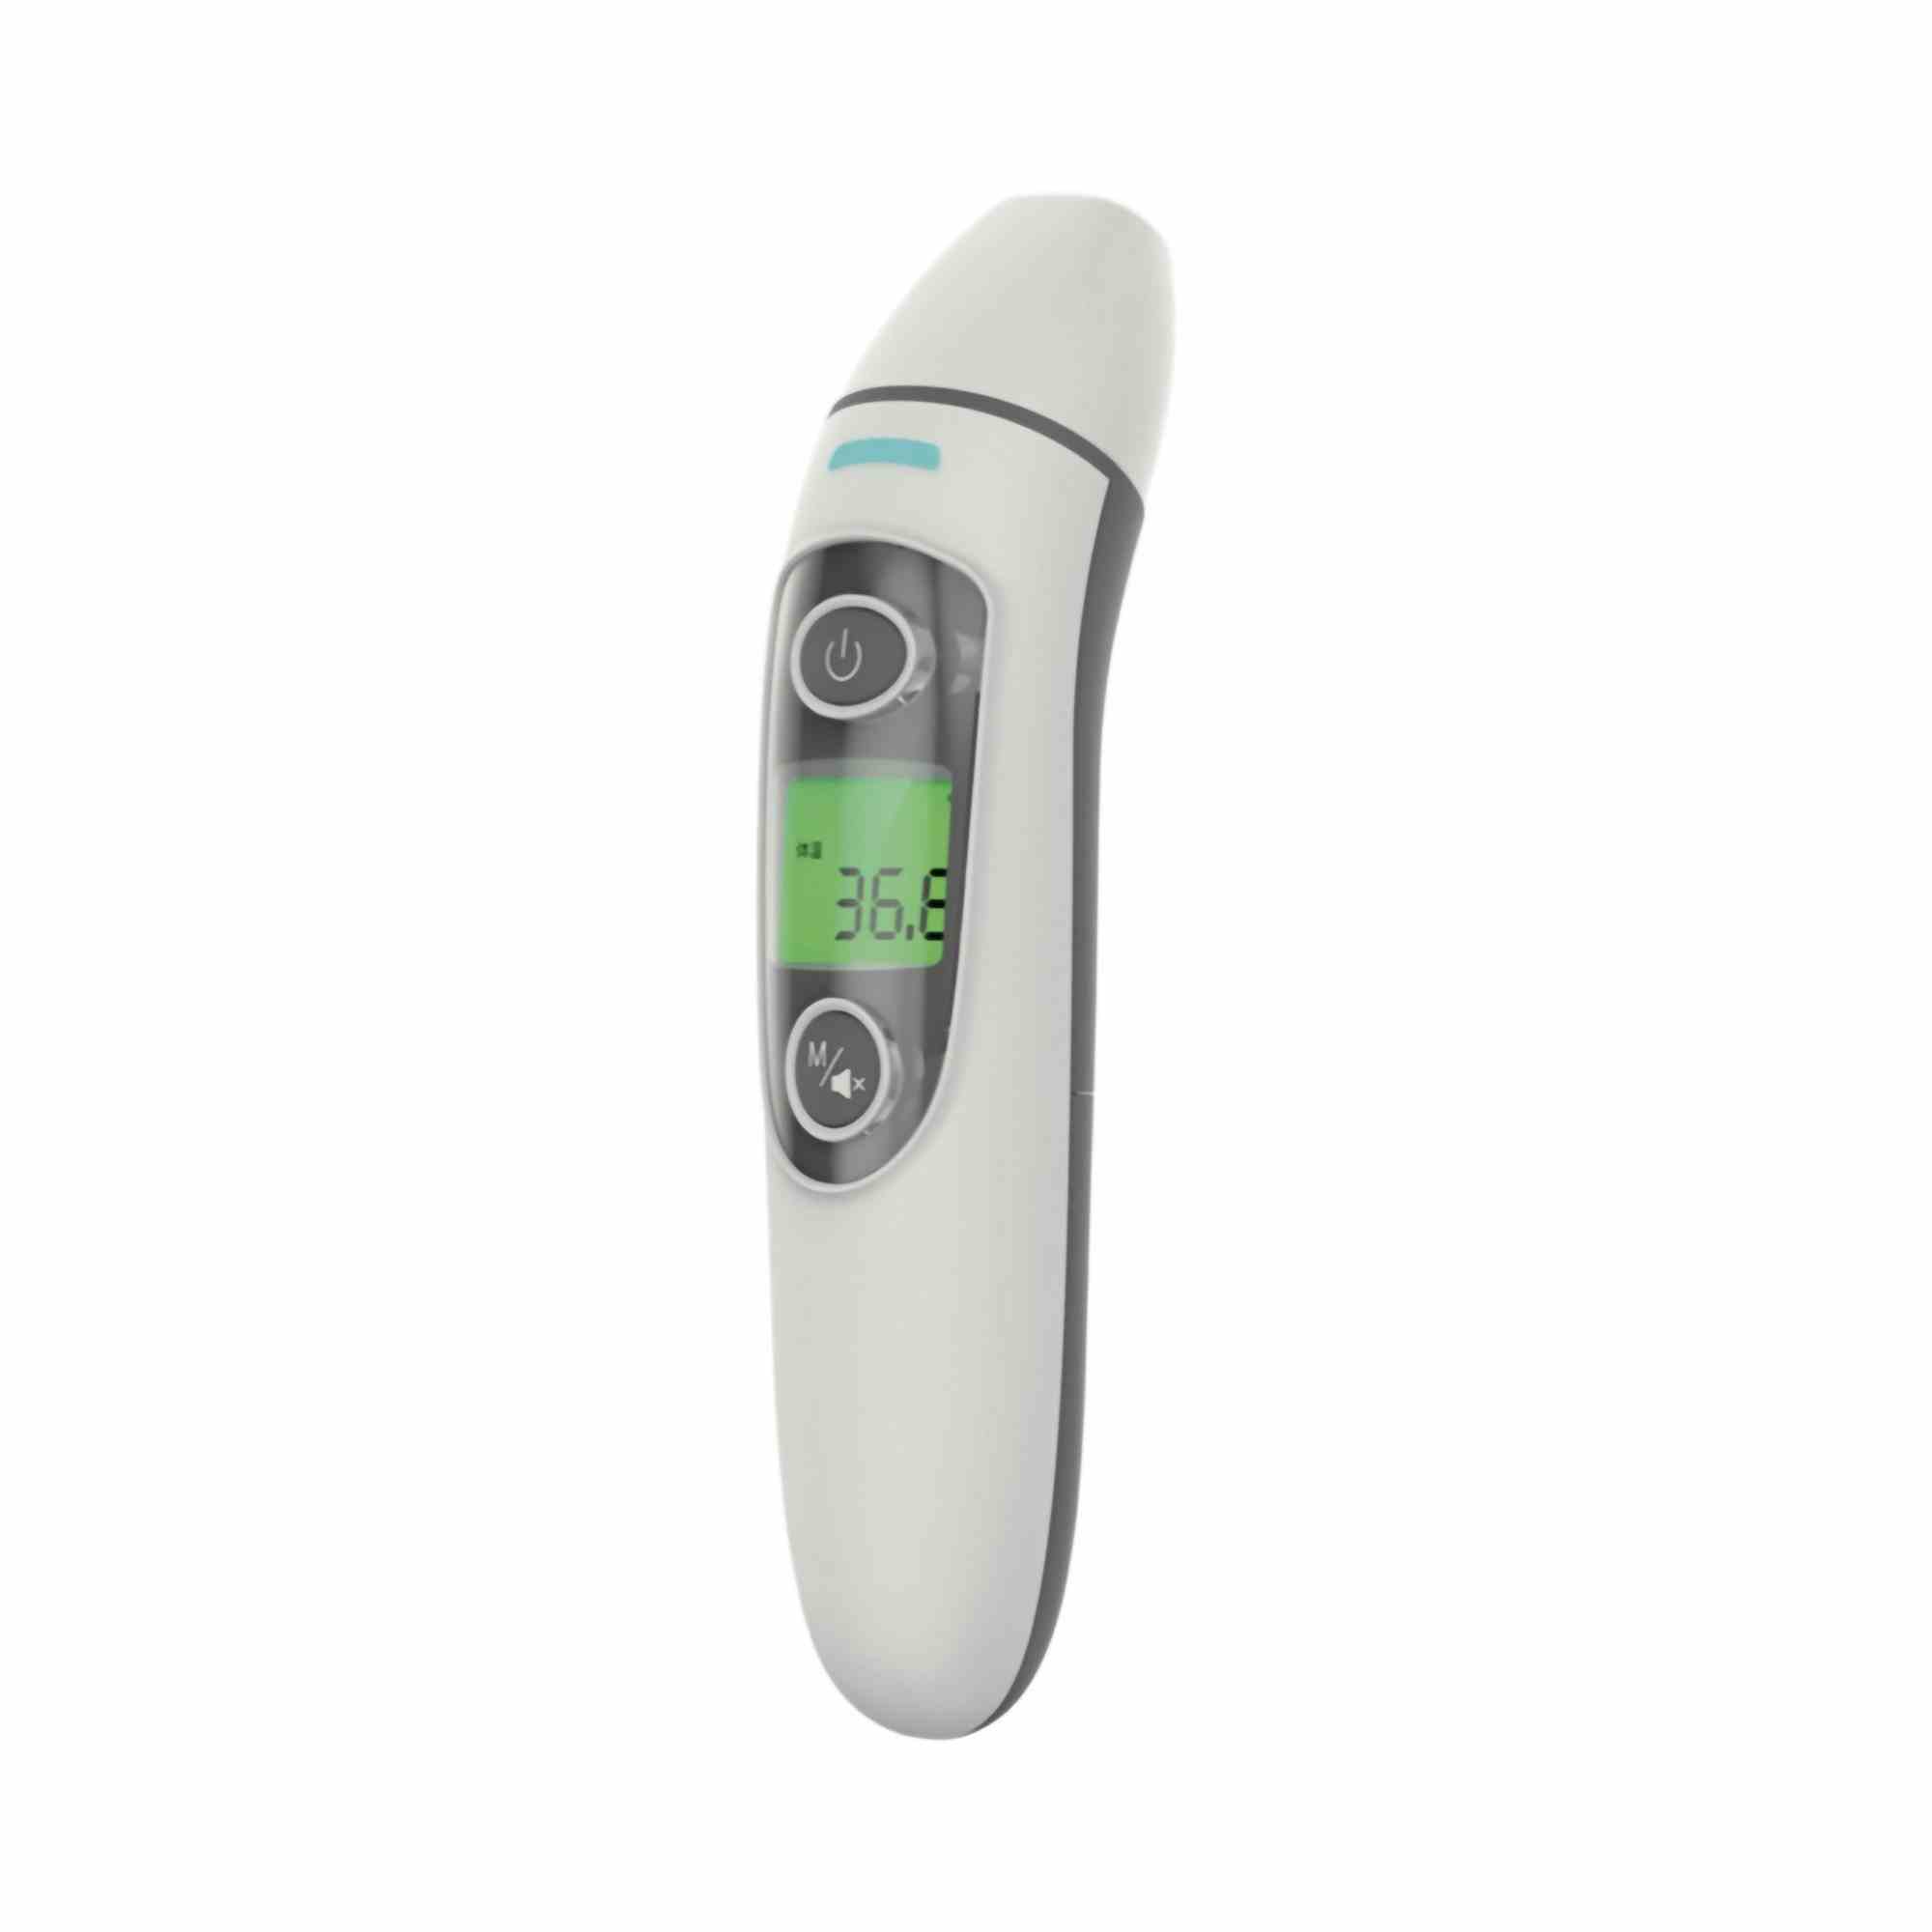 ProMed Specialties Infrared Non-Contact Skin Surface Thermometer, TH-300, 1 Each